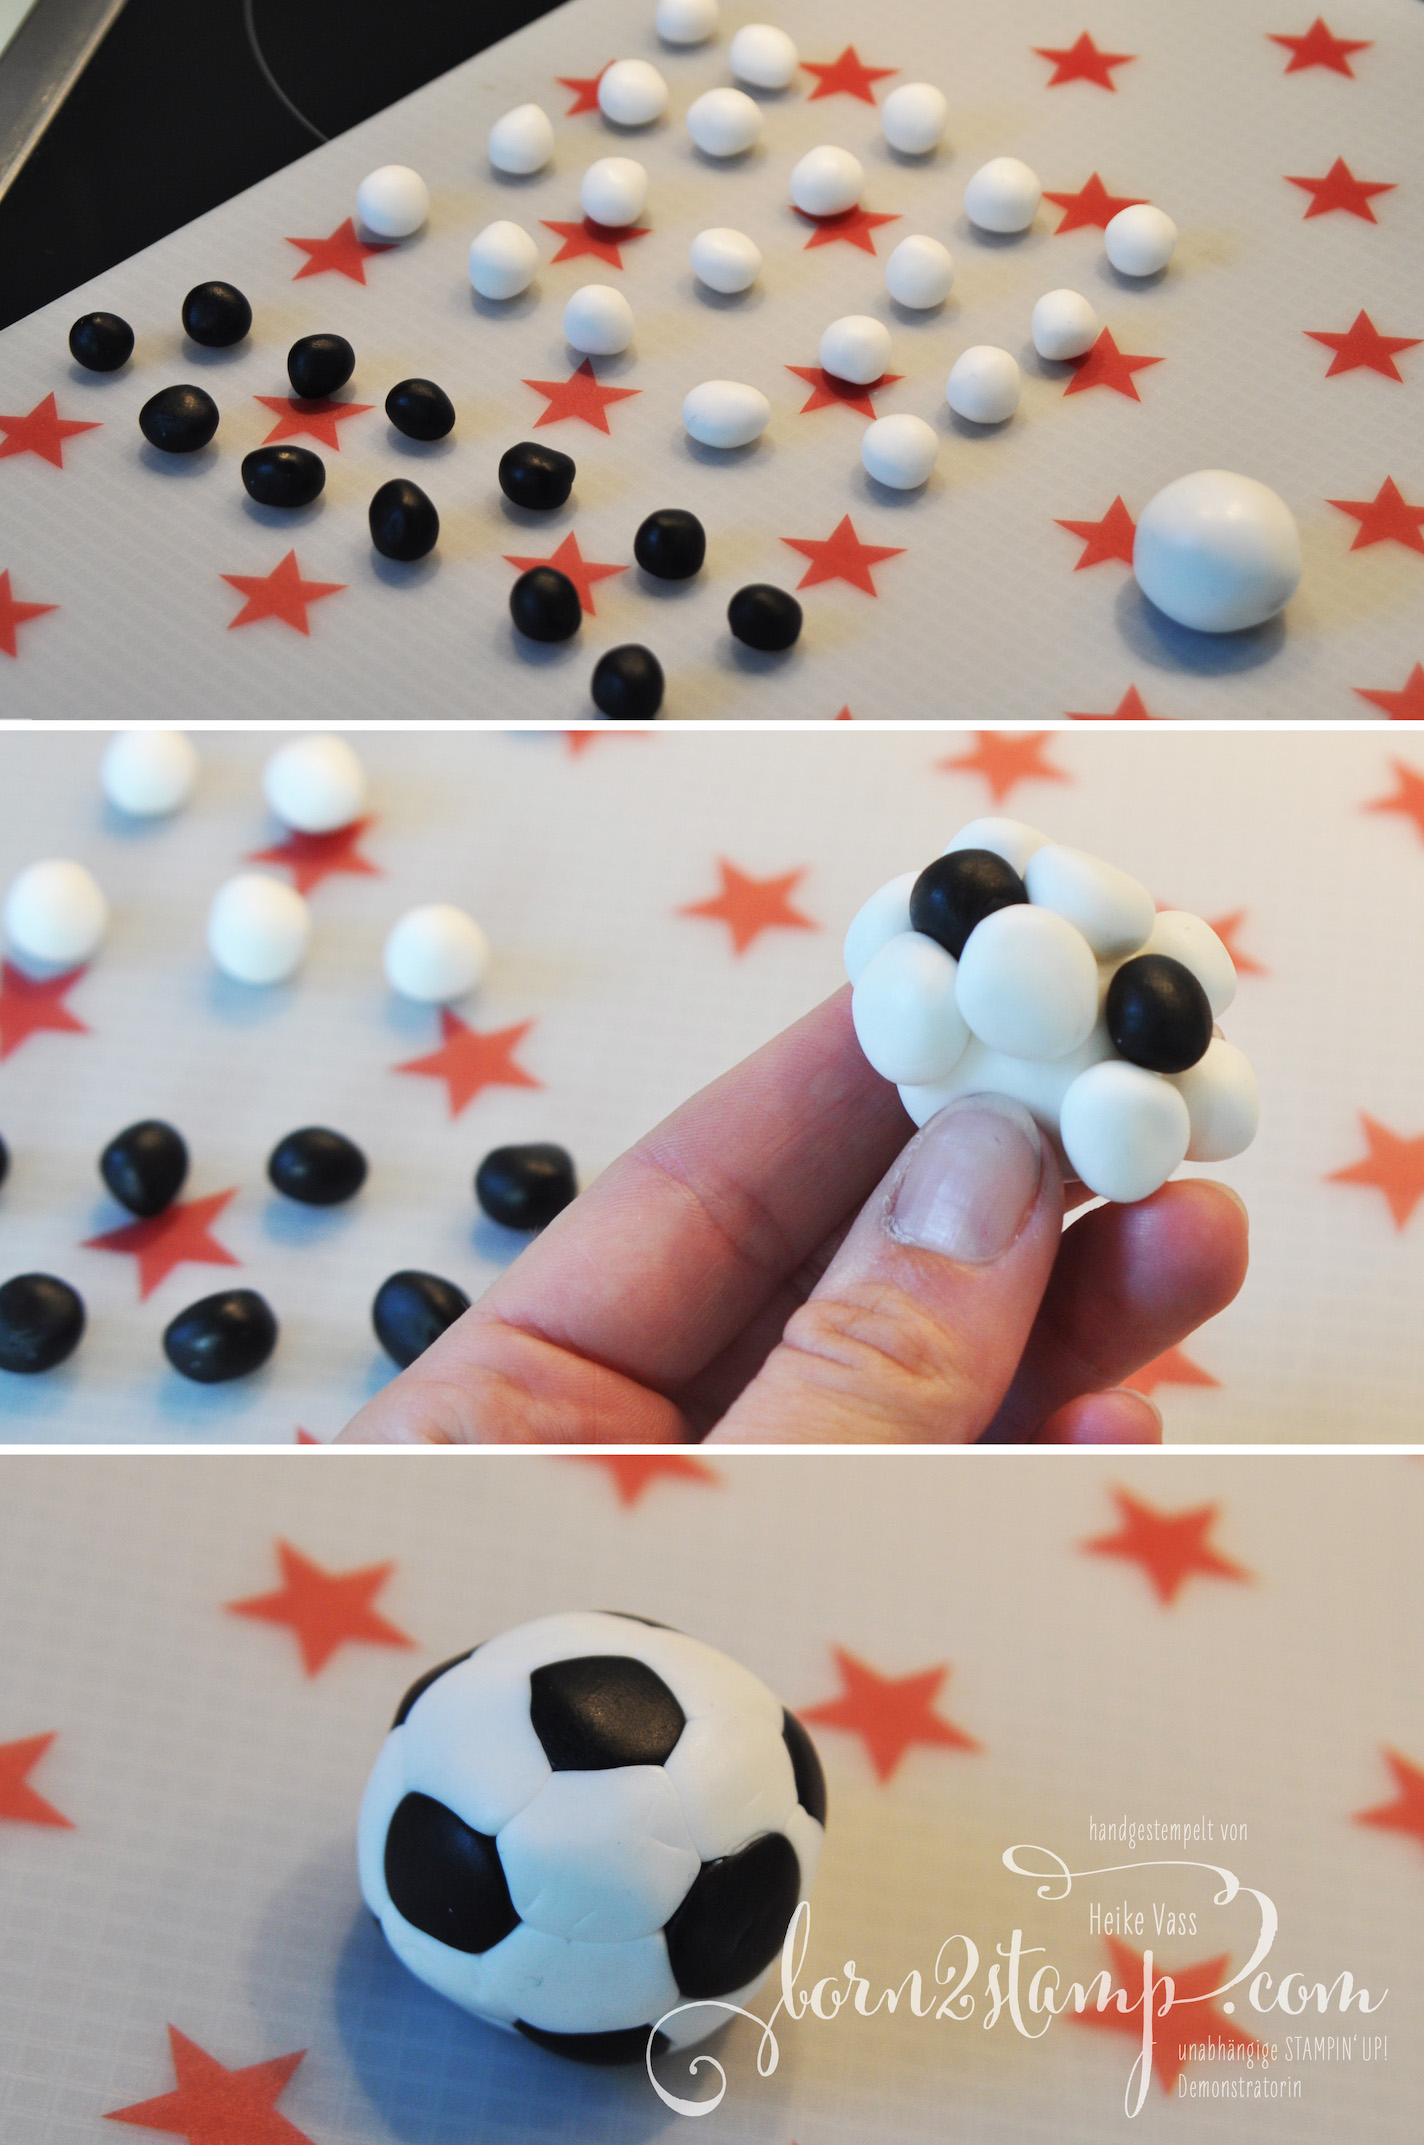 born2stamp STAMPIN‘ UP! Fussball-Party Torte